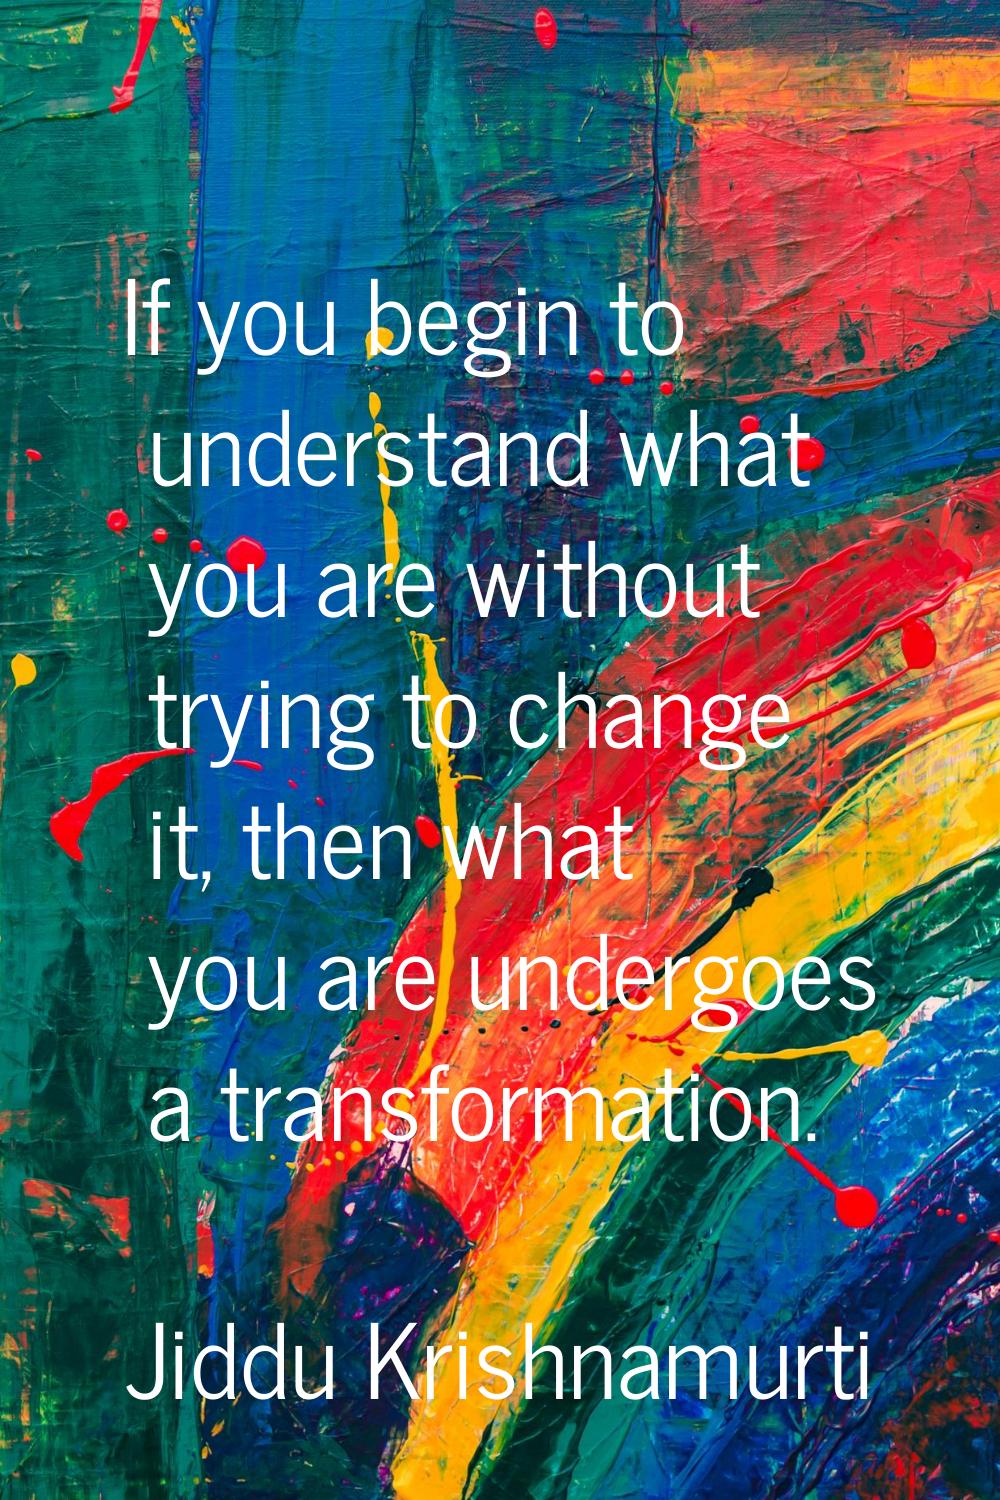 If you begin to understand what you are without trying to change it, then what you are undergoes a 